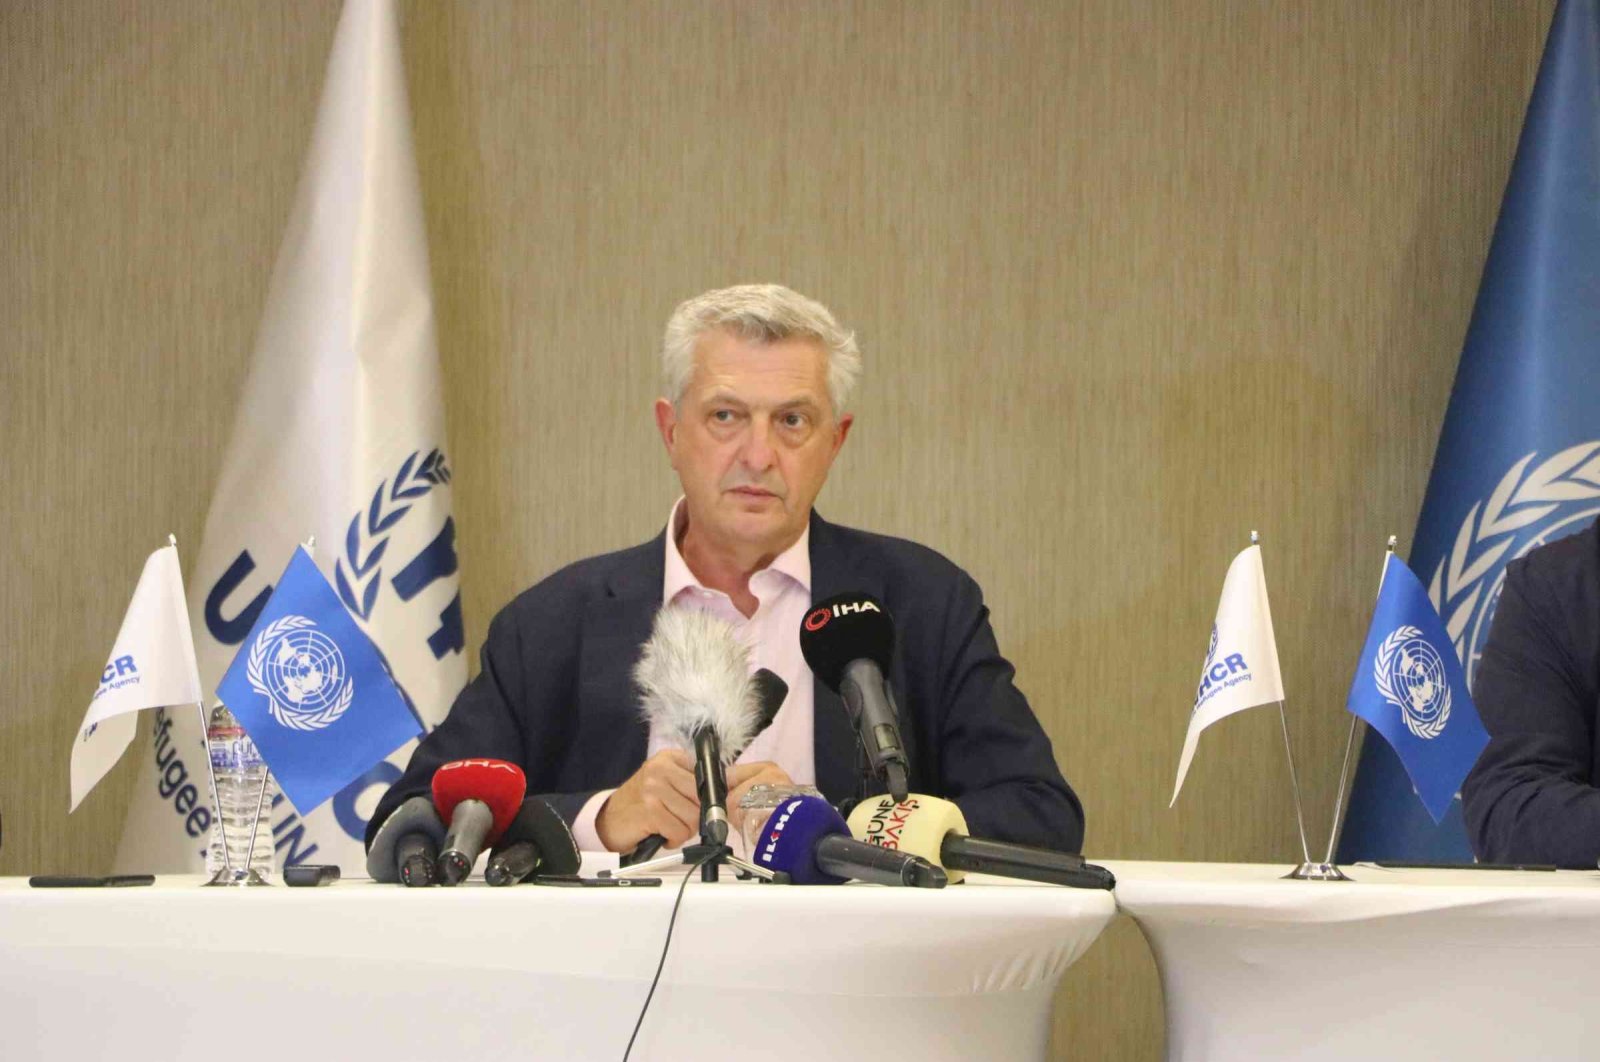 UNHCR Chief Filippo Grandi speaks to reporters at a news conference in Gaziantep, Turkey, Sept. 10, 2021. (DHA Photo)